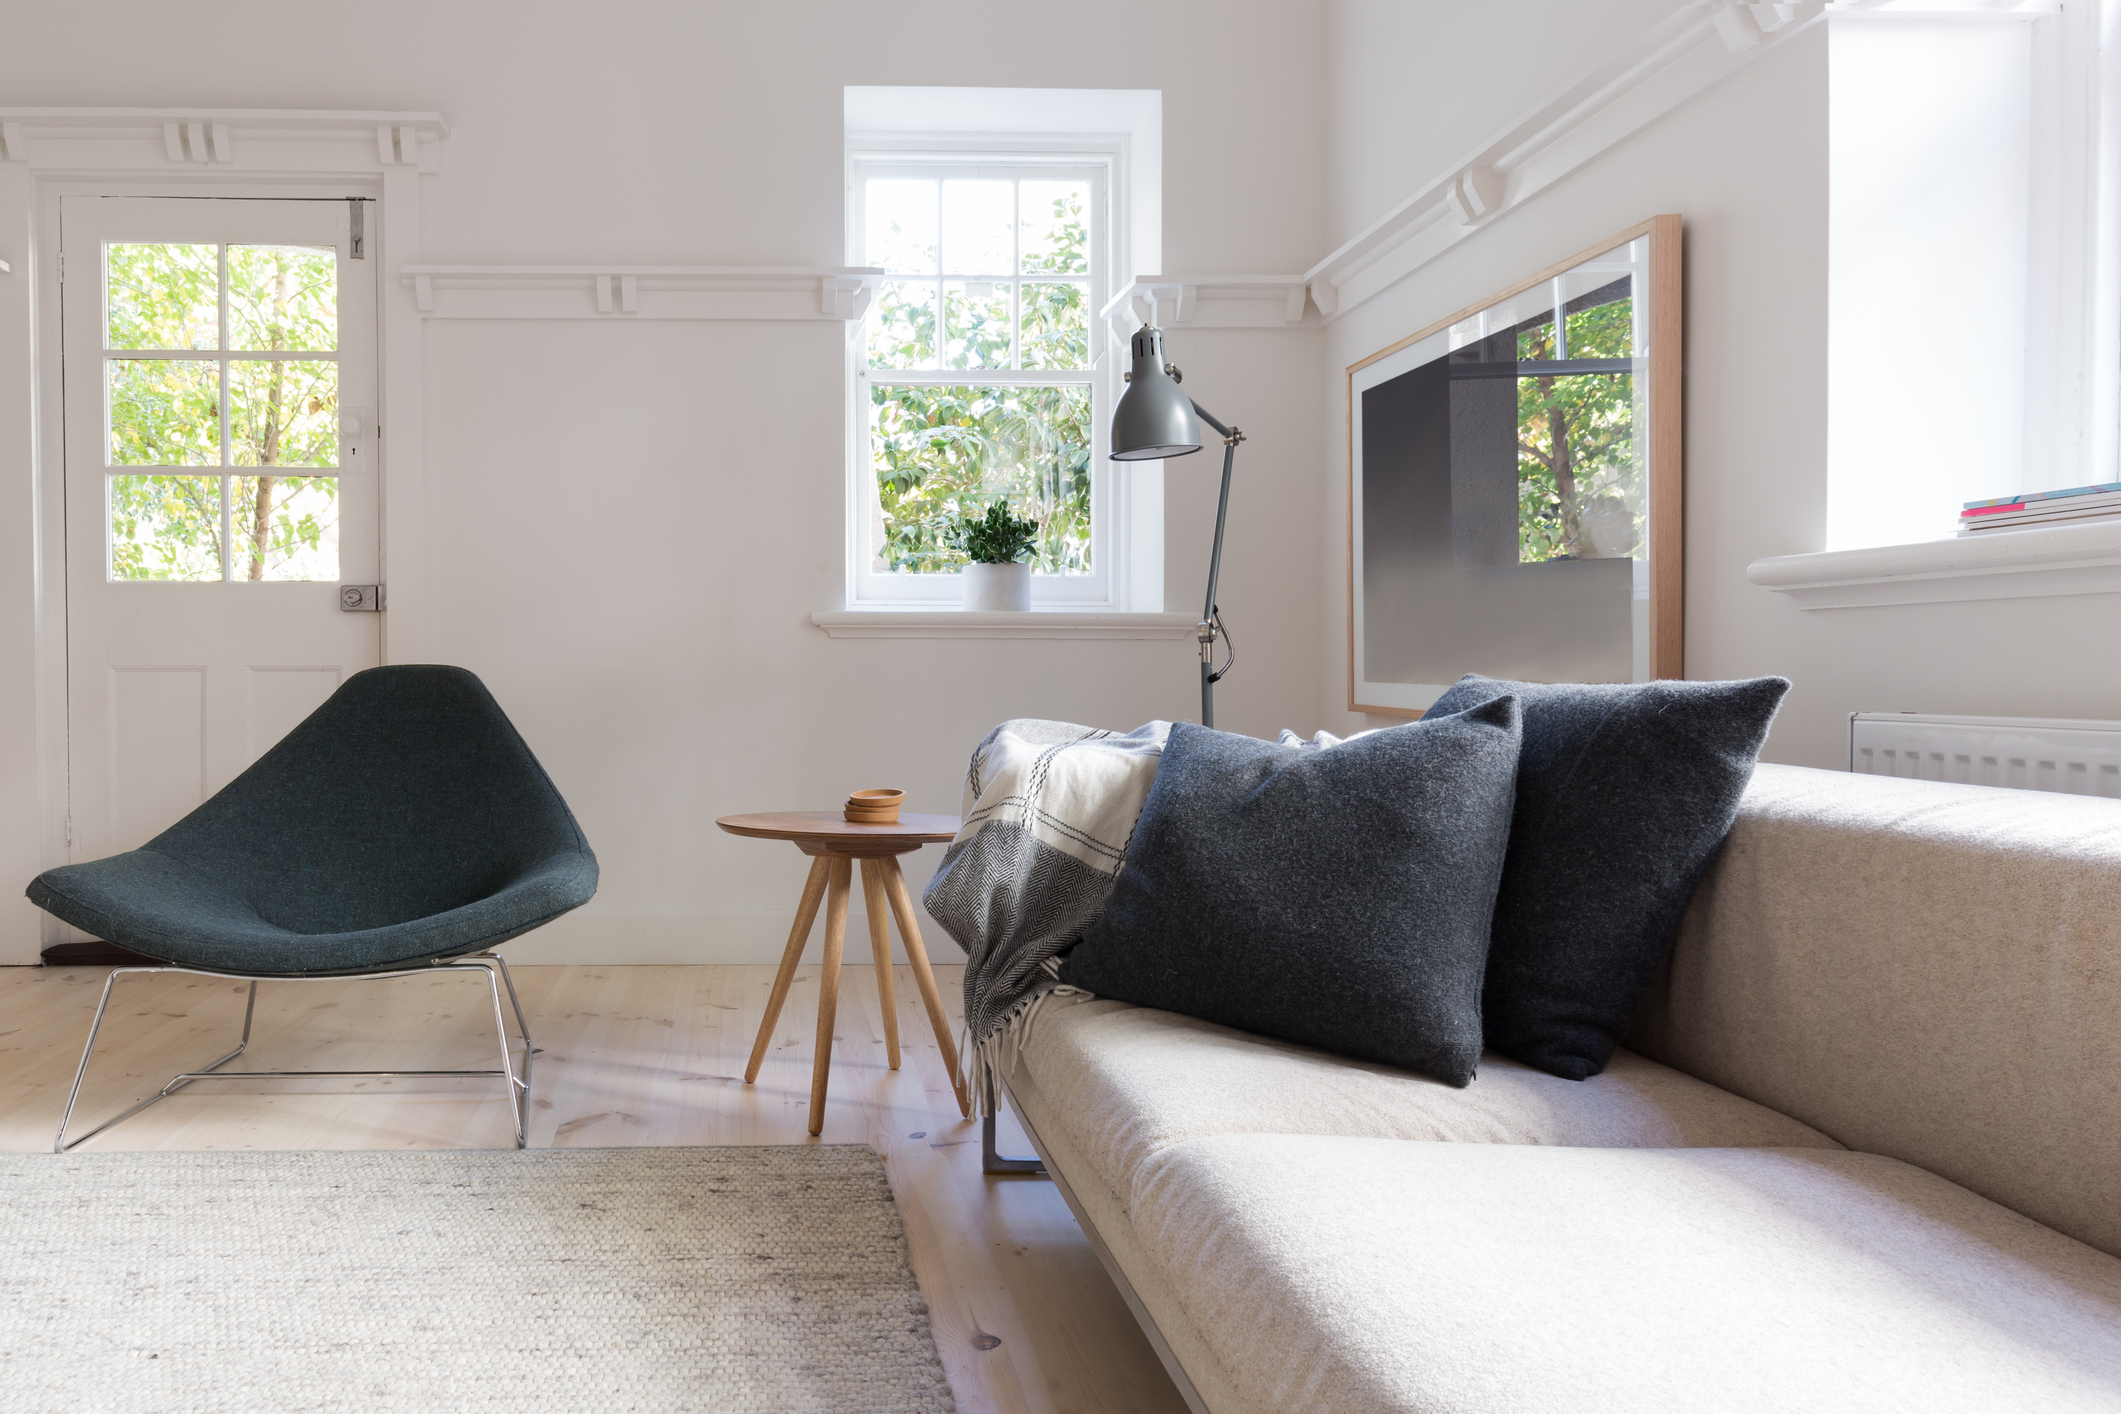 How to choose a neutral paint colour for your home